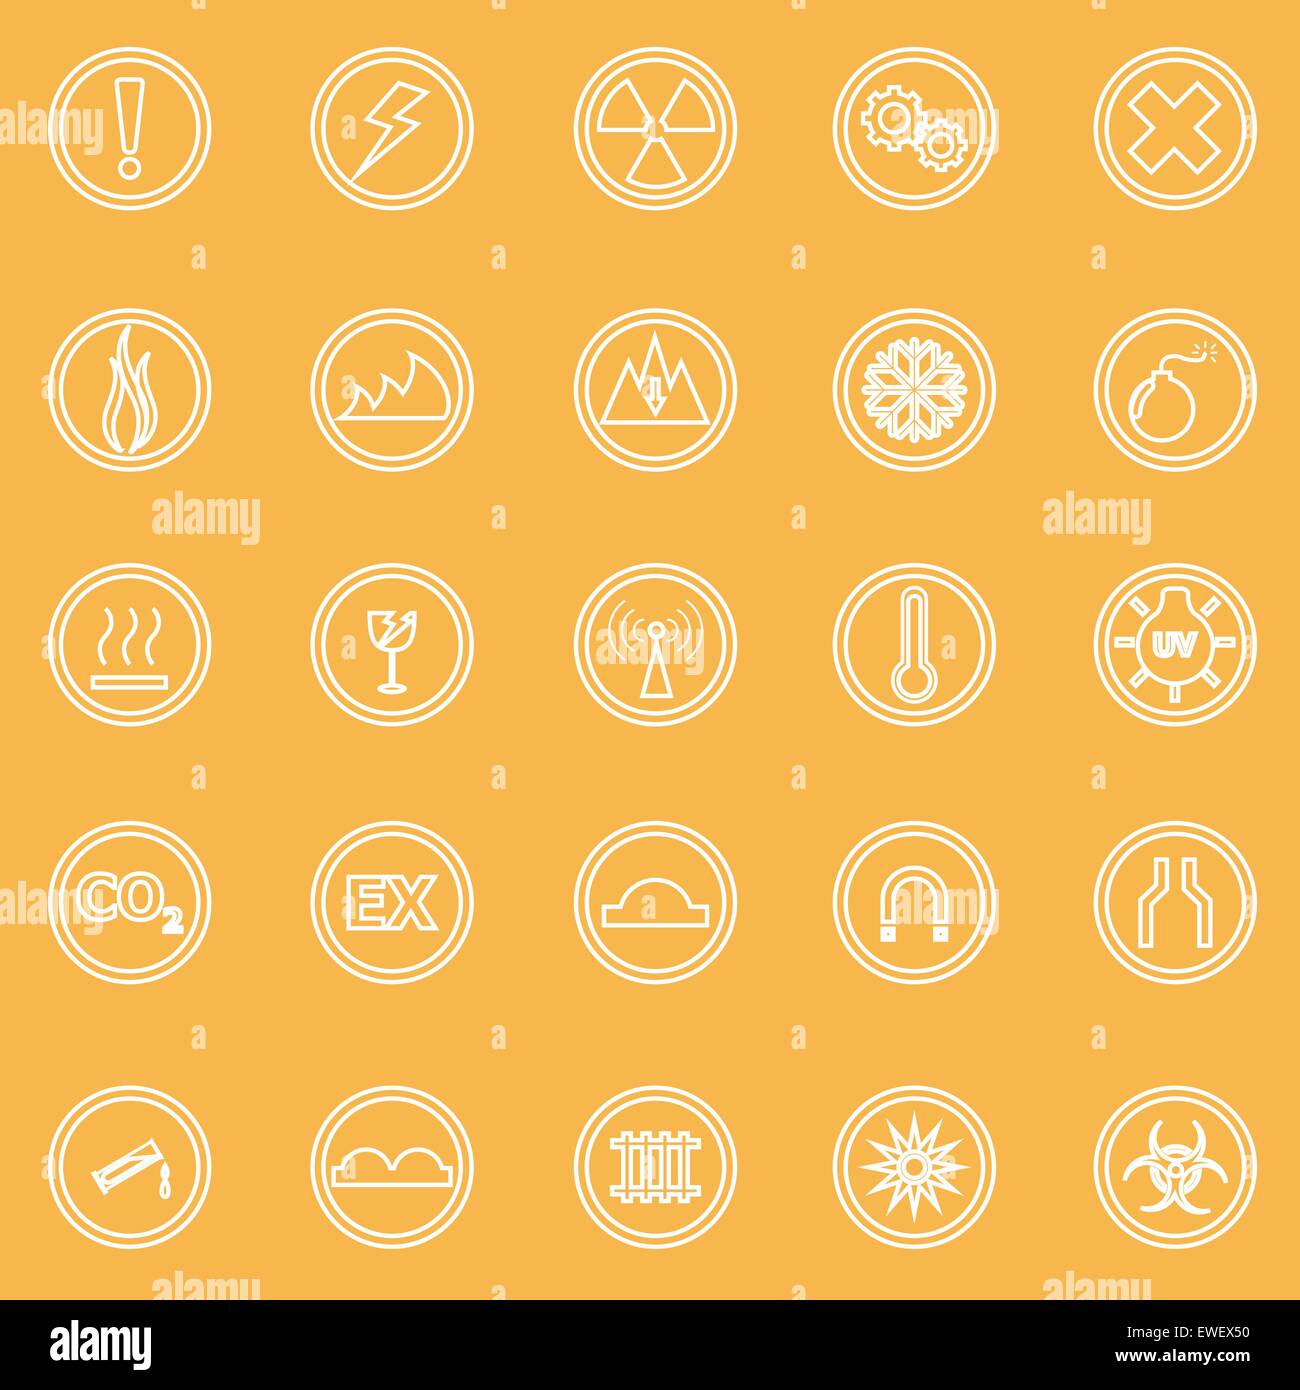 Warning sign line icons on yellow background, stock vector Stock Vector